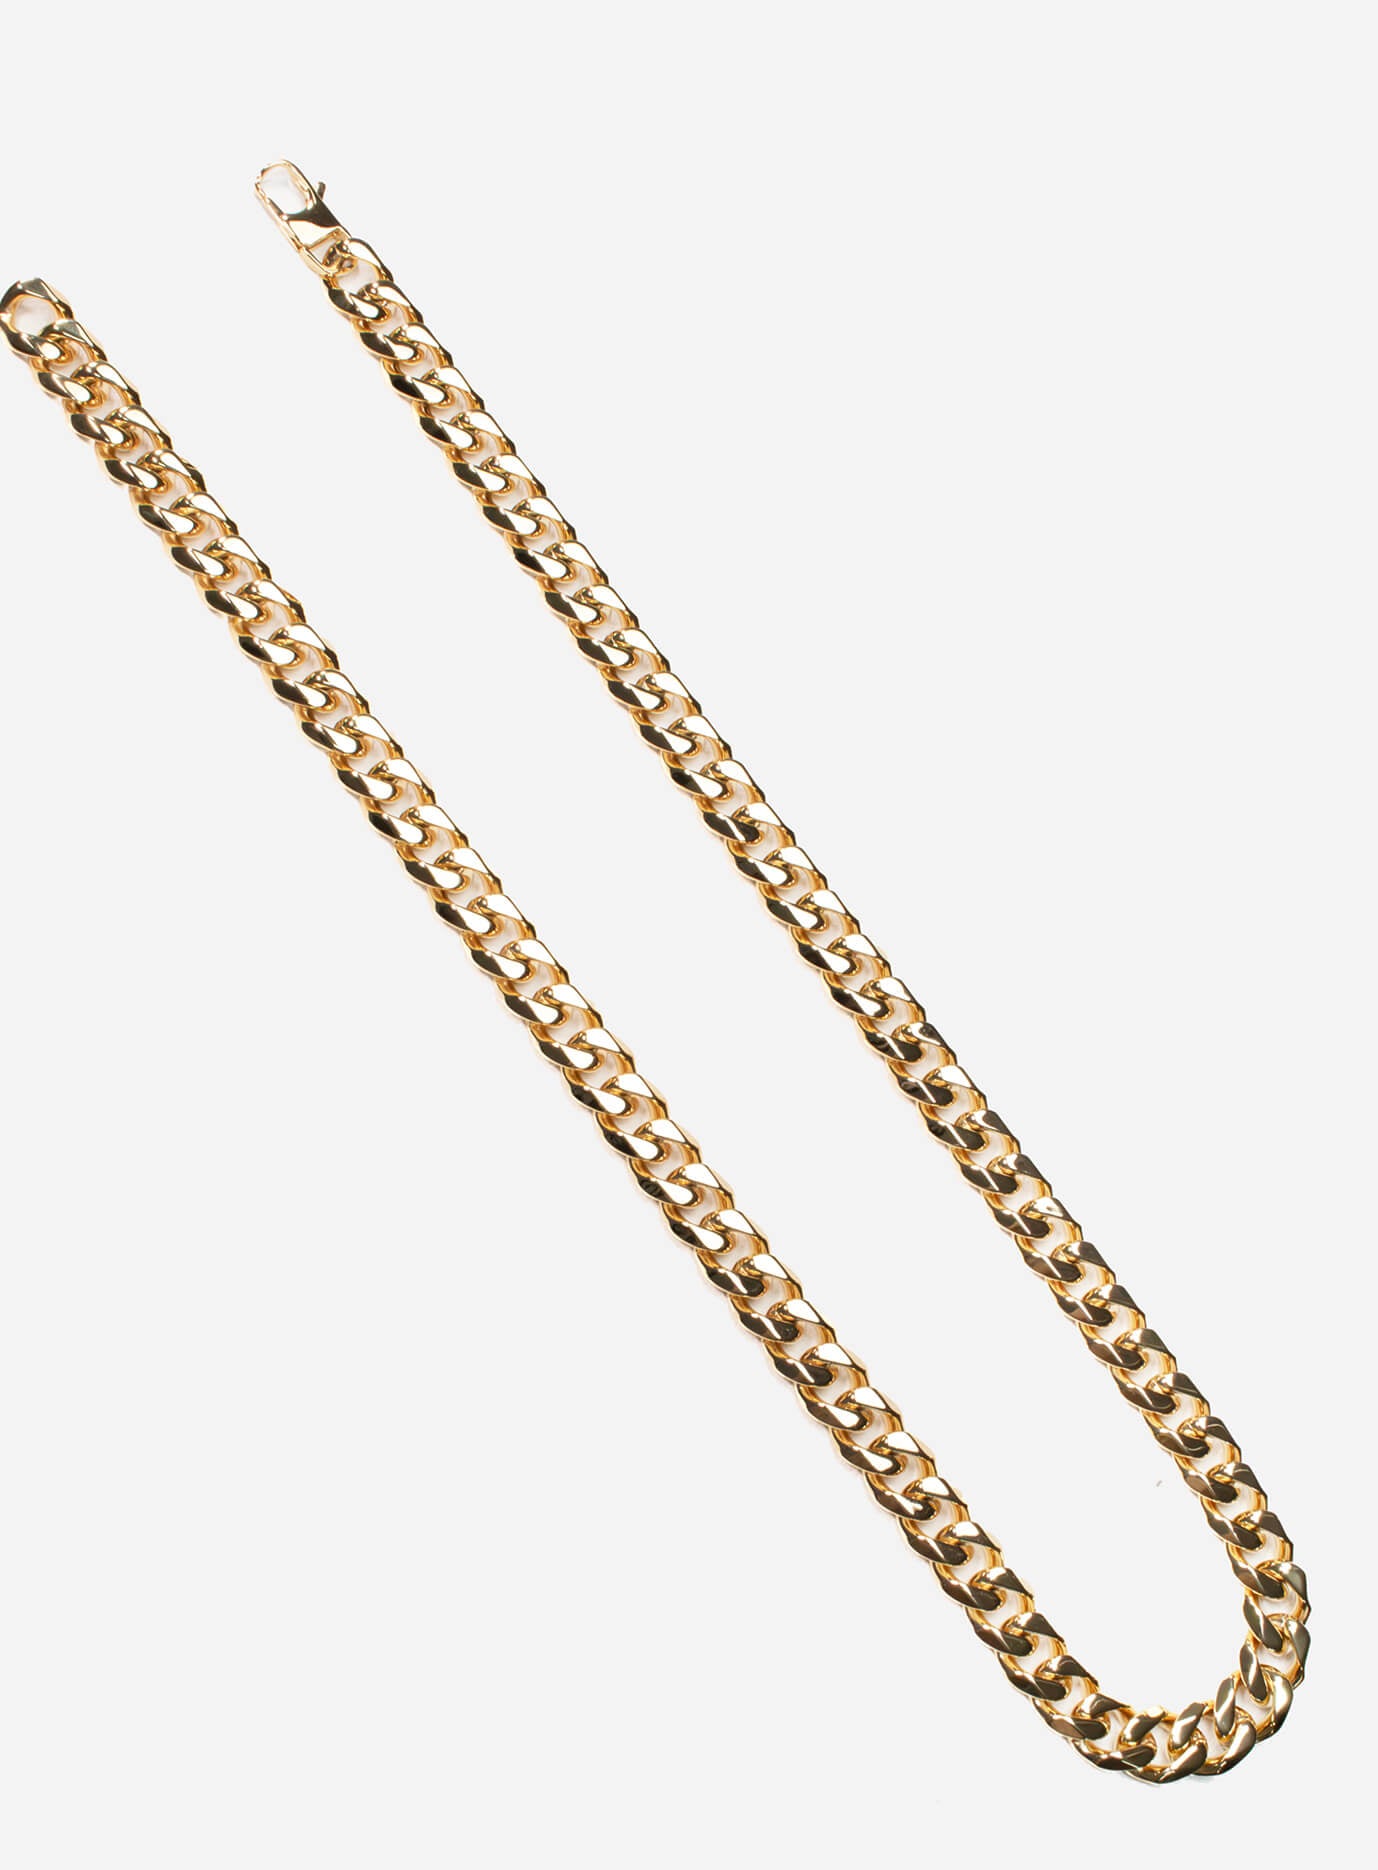 GD Stainless Steel Plated Chain 10.5mm x 61cm